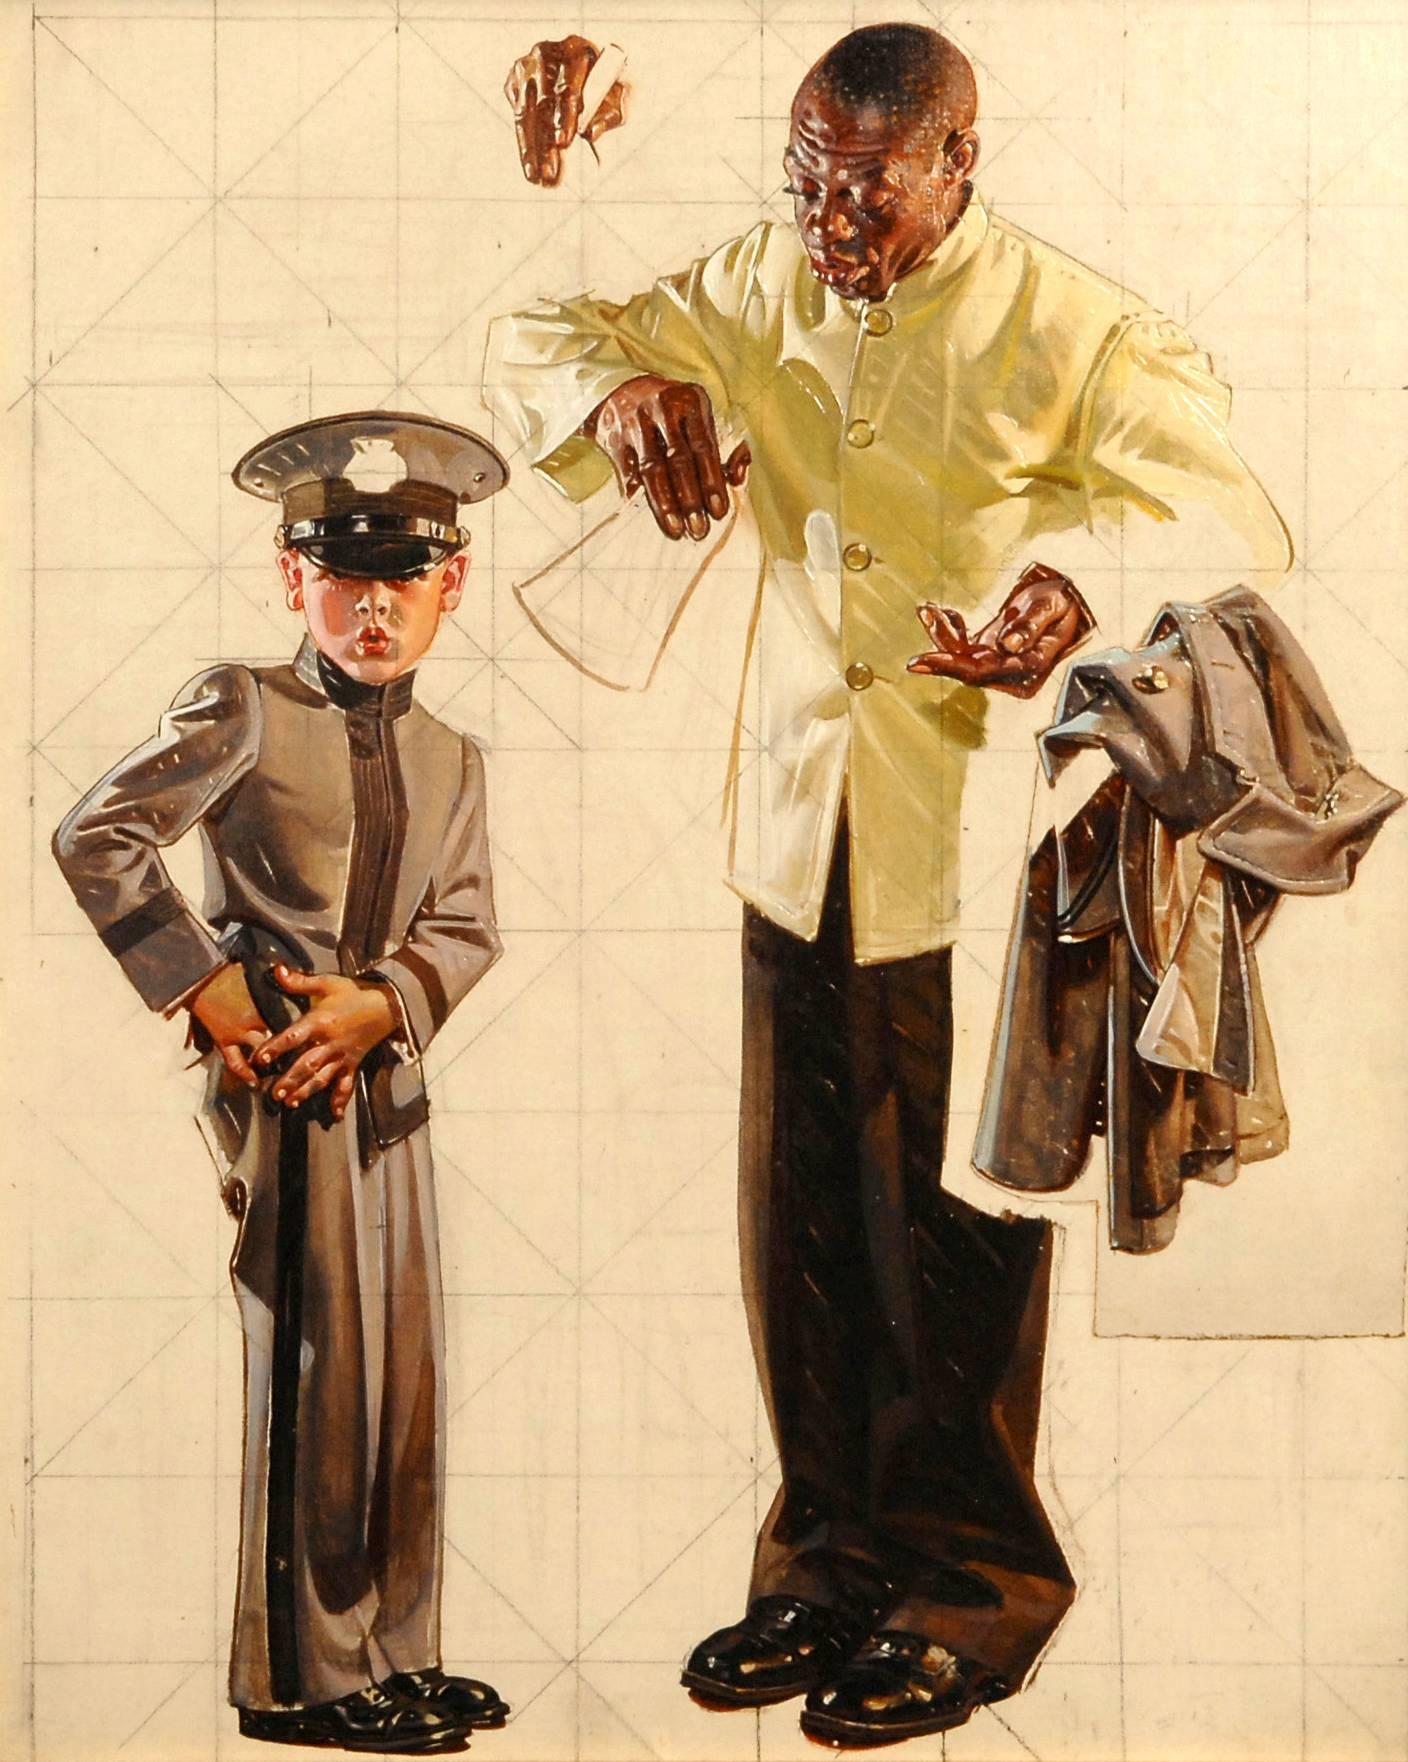 Joseph Christian Leyendecker Figurative Painting - Preliminary Study for a Saturday Evening Post Cover "Tipping the Porter"